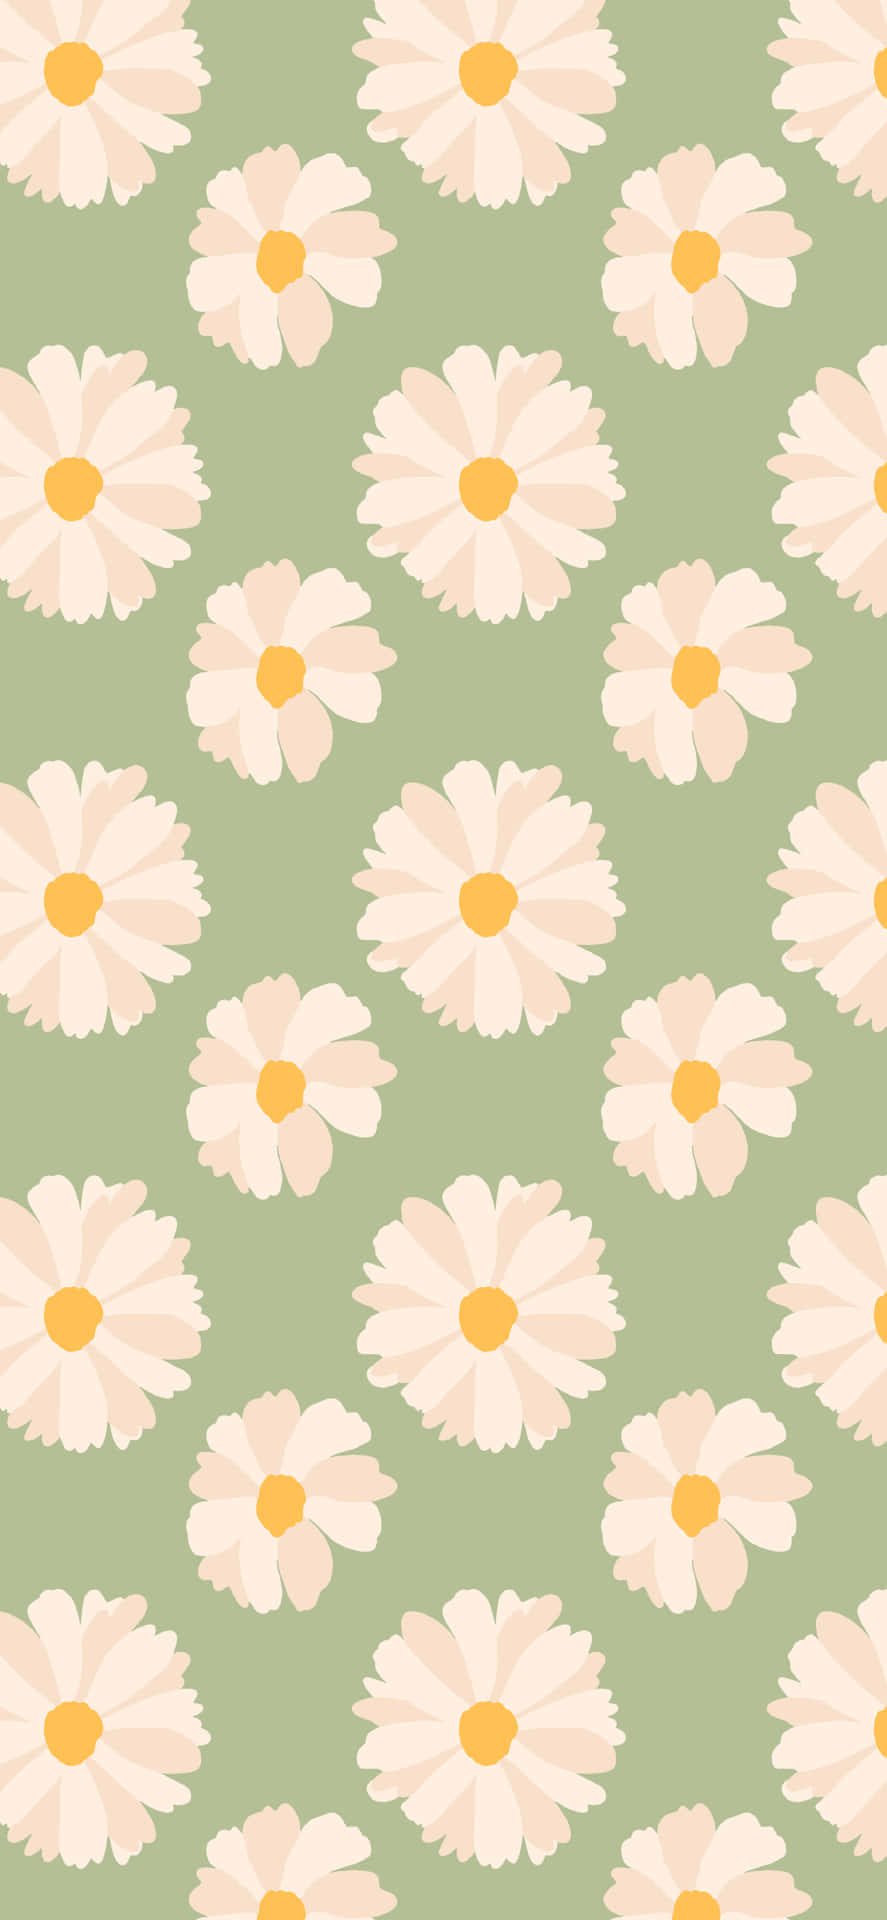 75 Gorgeous Spring Wallpaper Downloads For Your iPhone